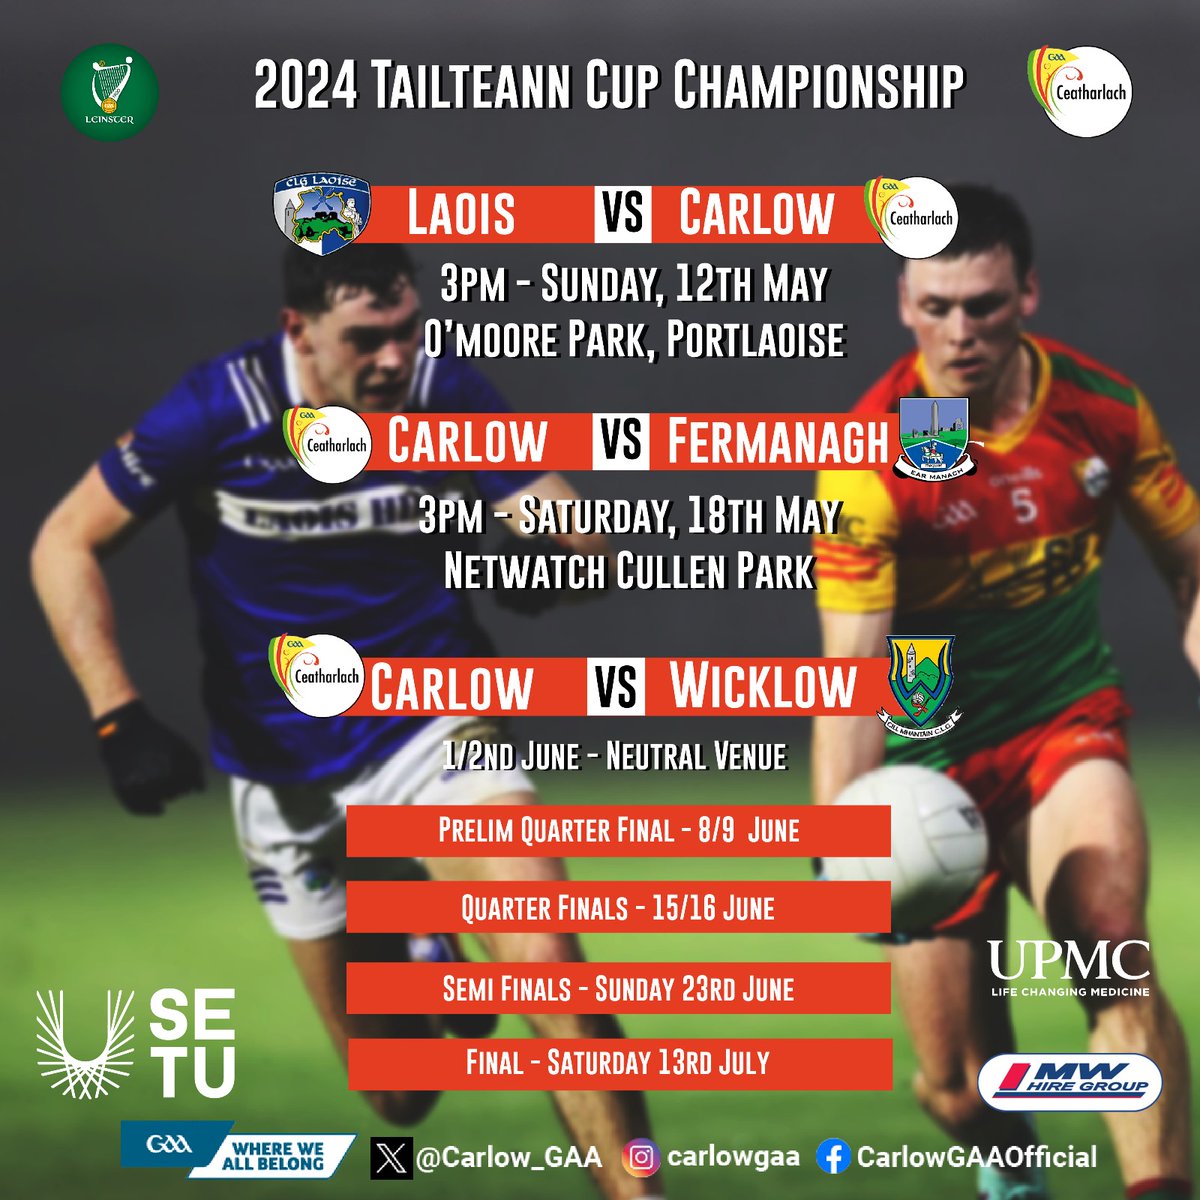 🇲🇱@Carlow_GAA 's FIrst and Second Rounds of the Tailteann Cup have now been fixed - see details attached. Details are awaited of the Third Round V Wickow which will be at a neutral venue on the weekend of 1/2 June.